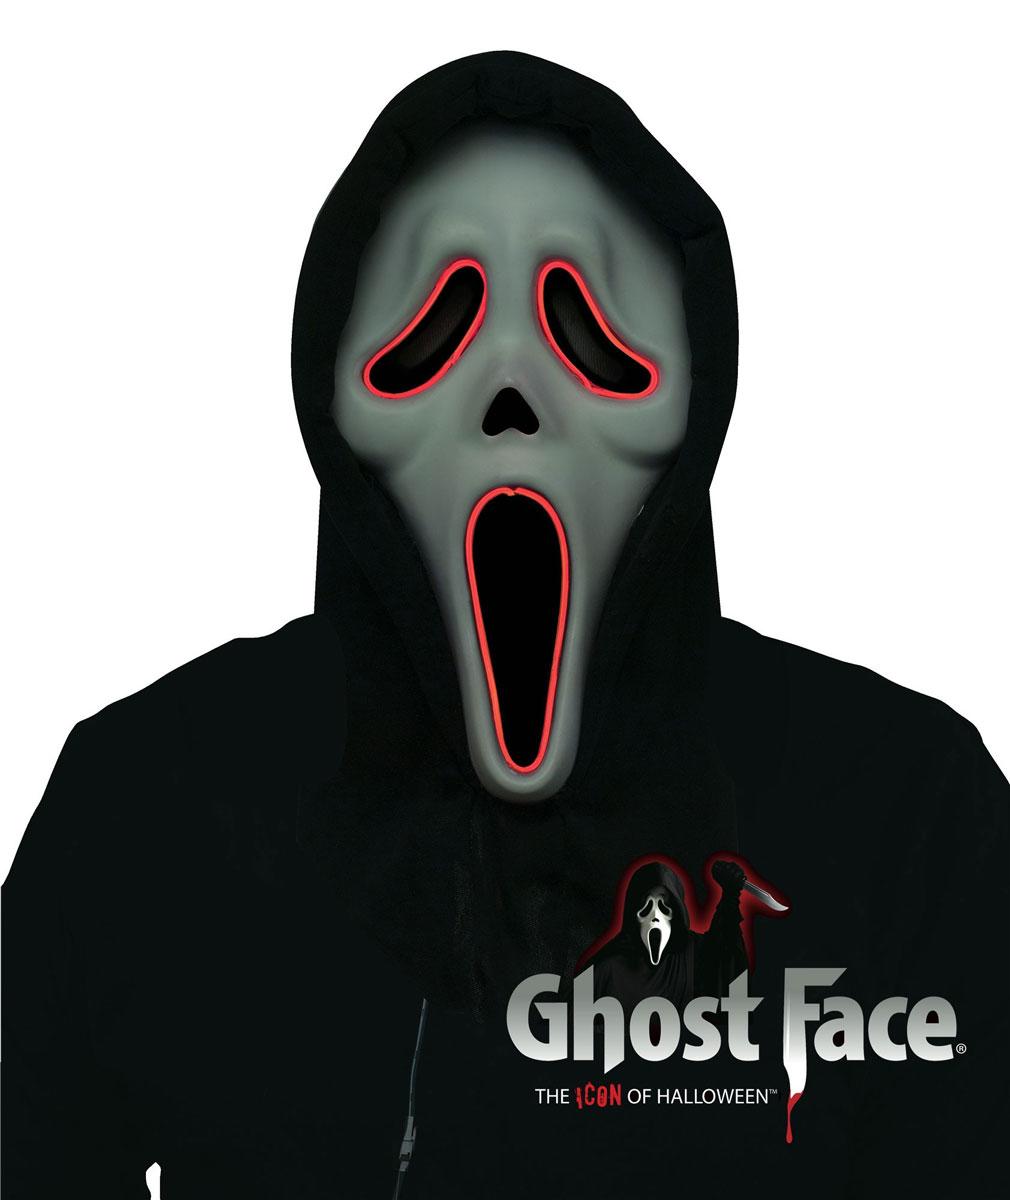 Deluxe Illumo Ghostface Mask shown in the dark, by Fun World 93406 available here at Karnival Costumes online party shop